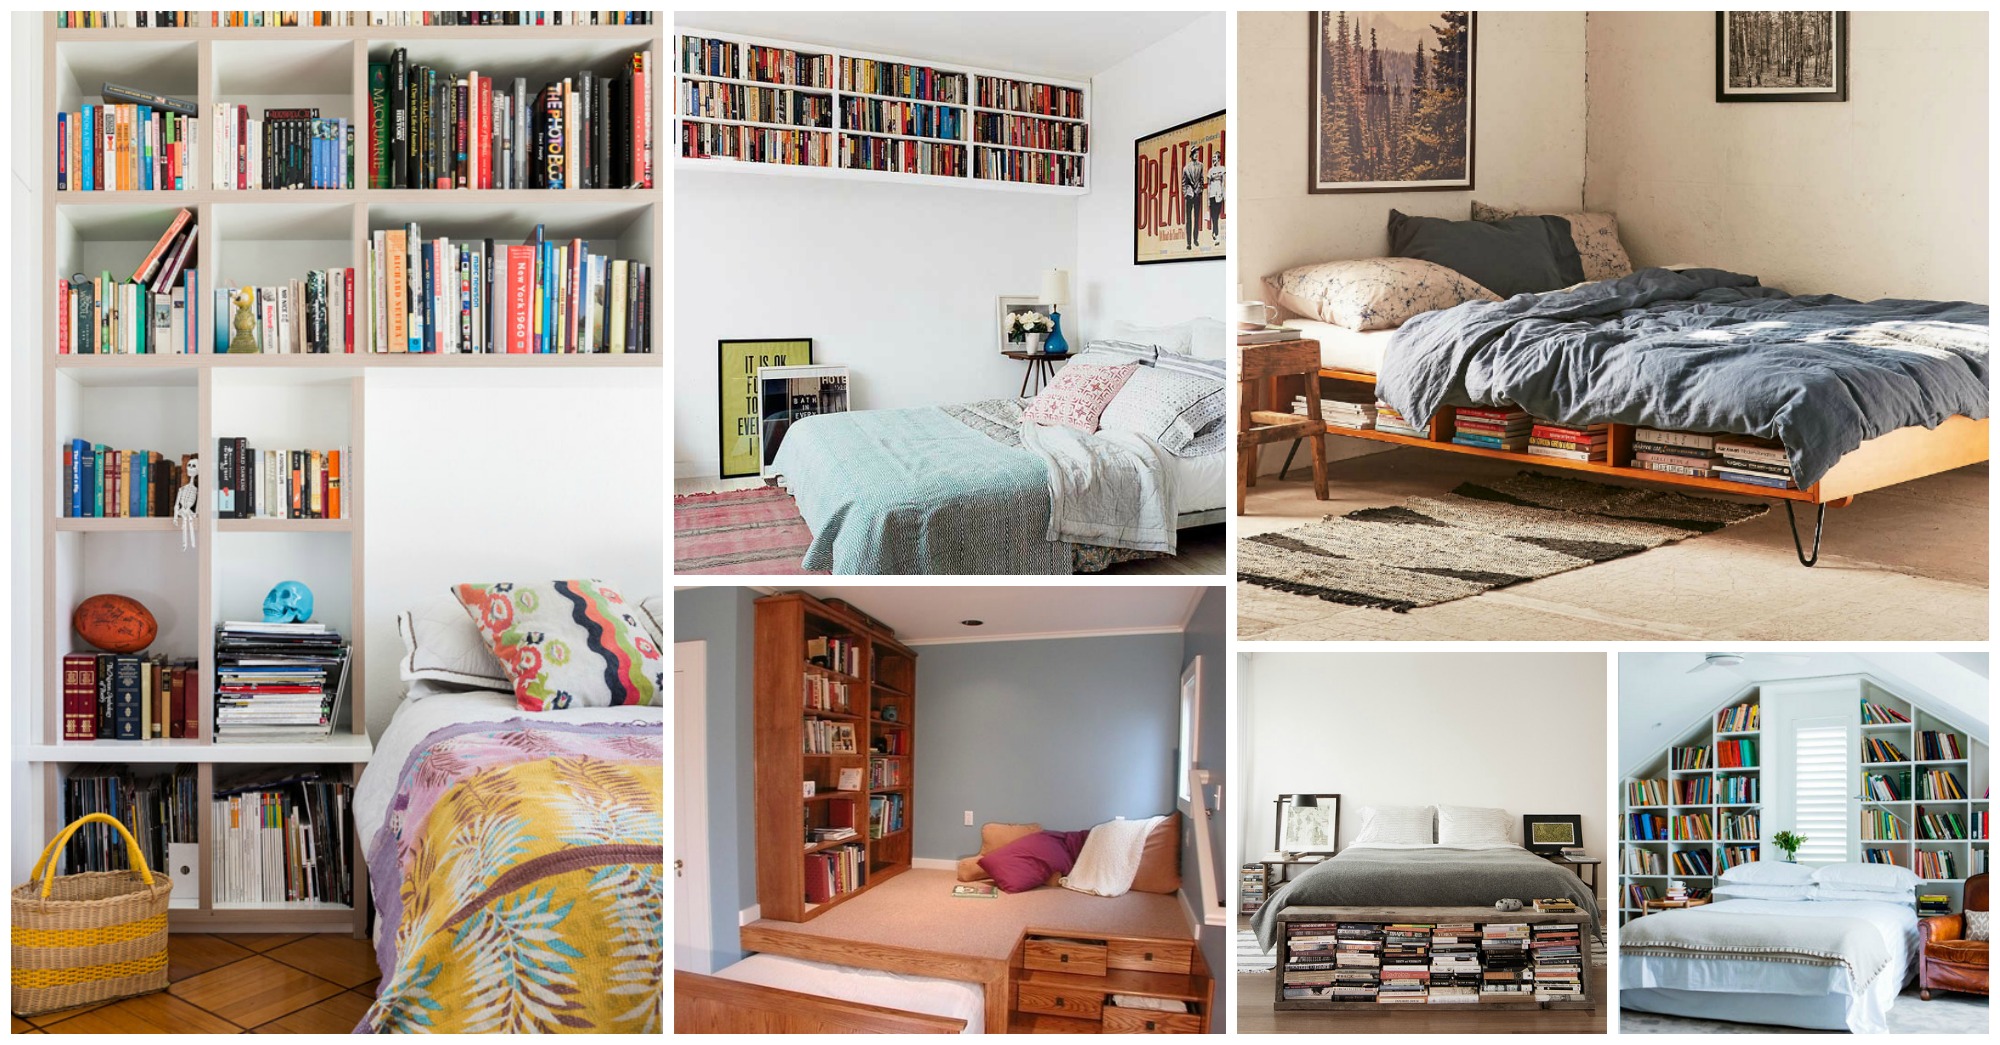 Decorating Bedroom With Bookshelves